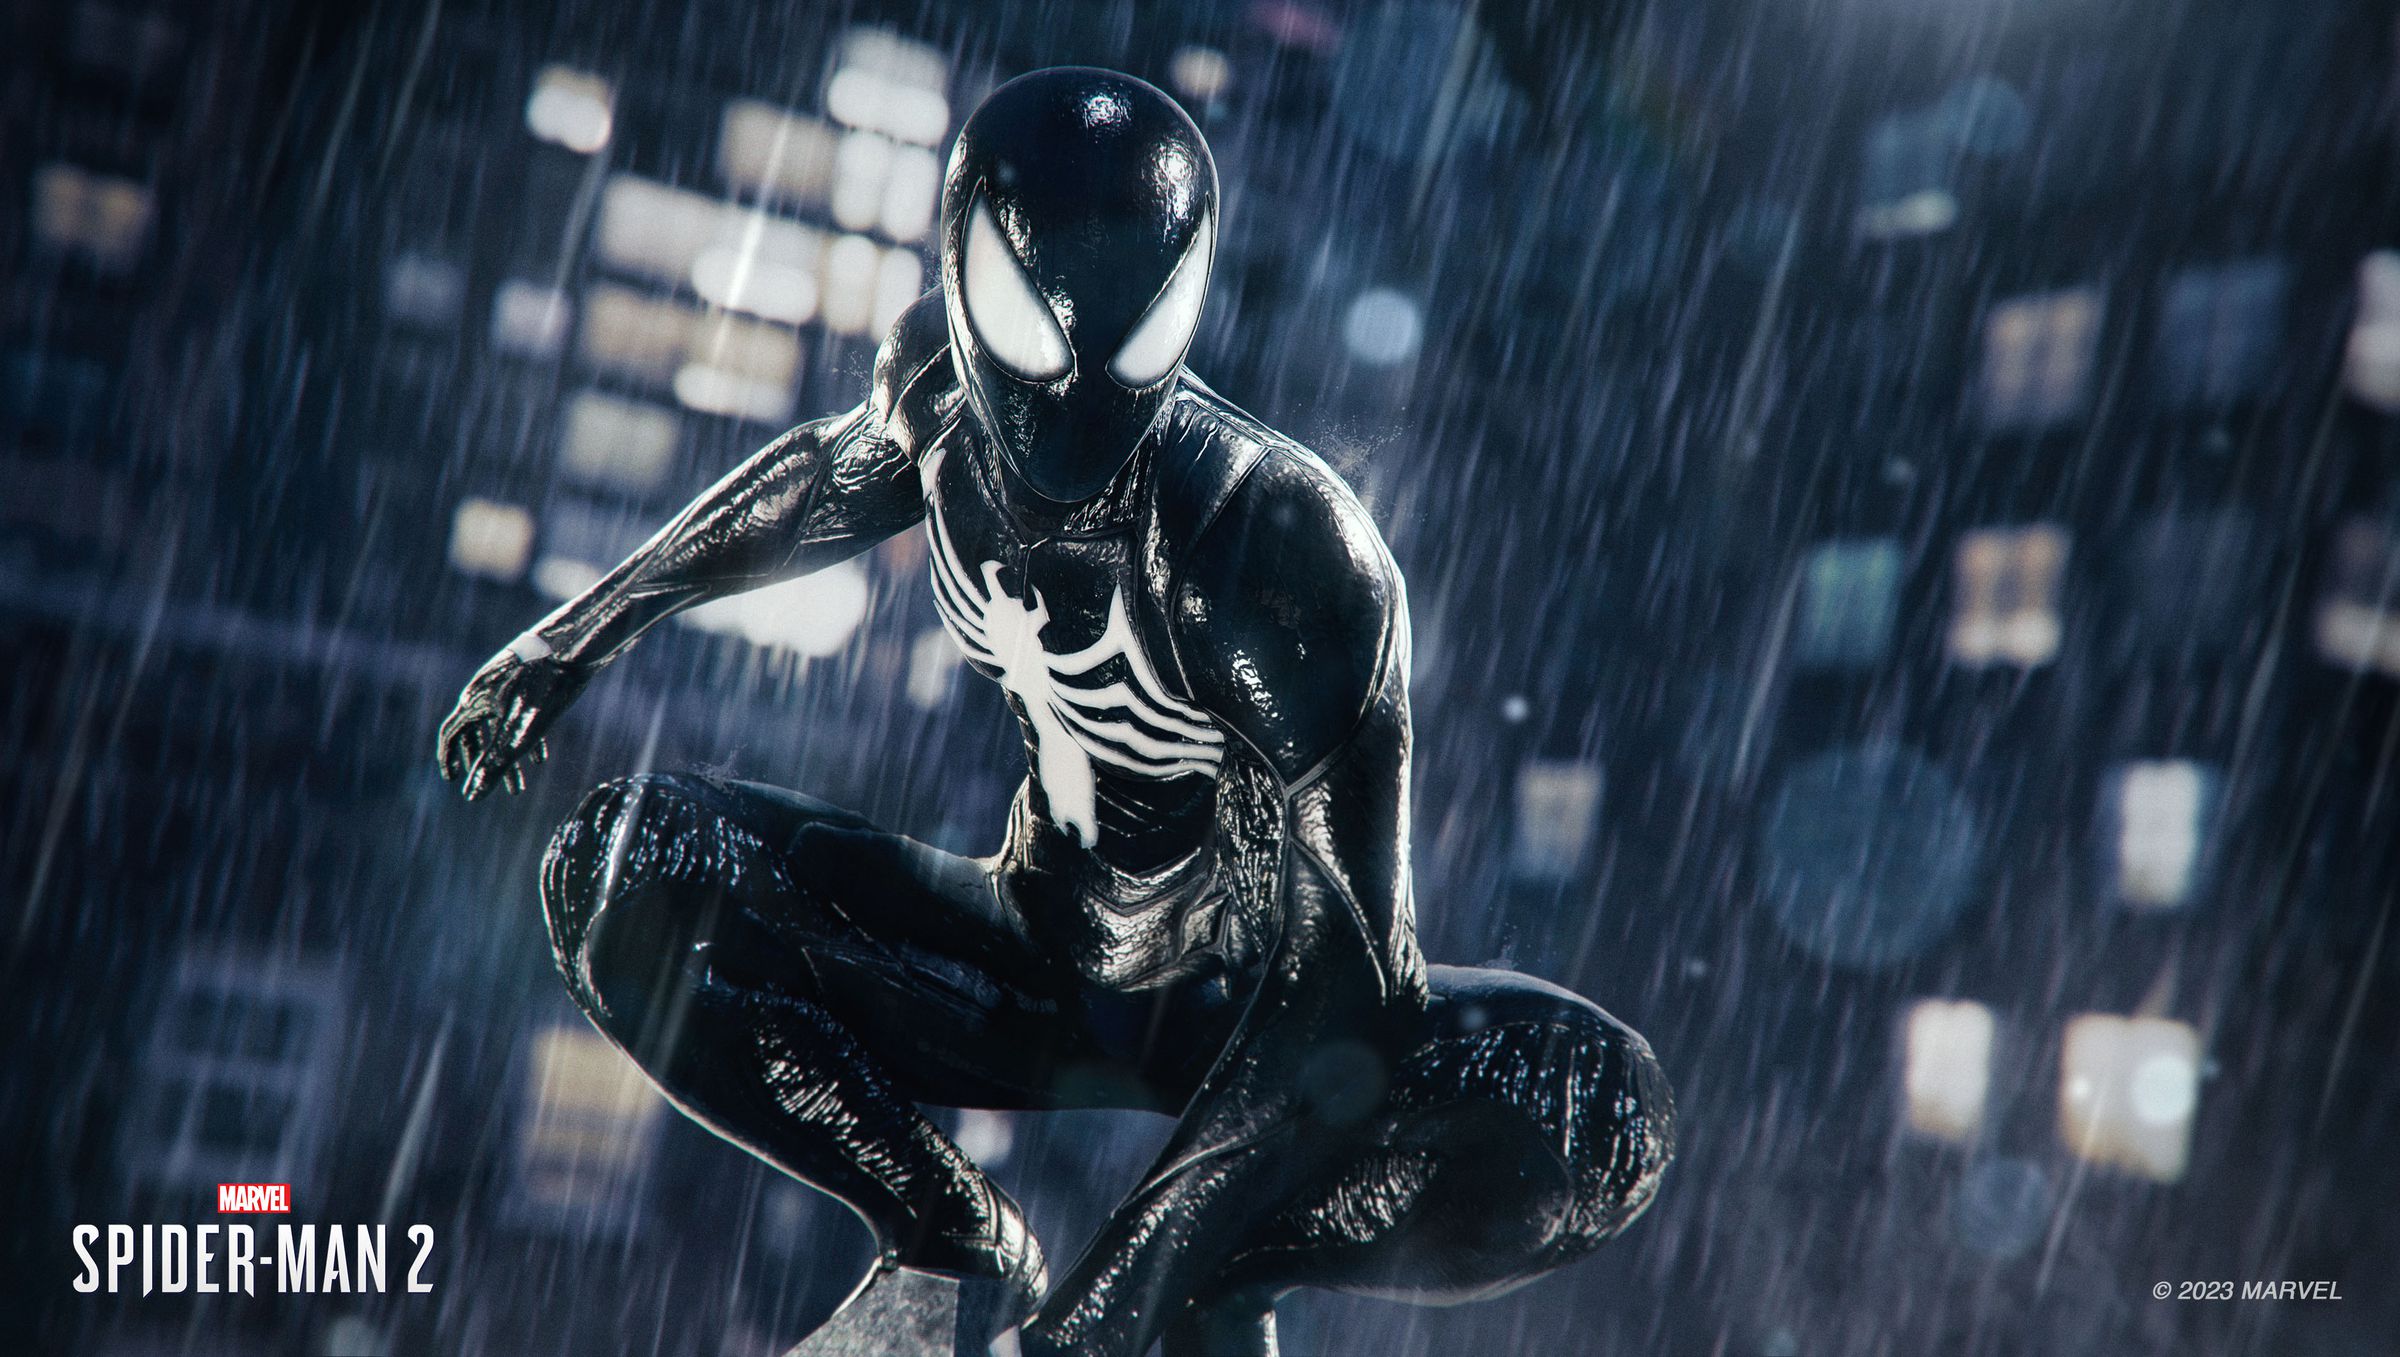 A screenshot from the video game Spider-Man 2, of Peter Parker in a black symbiote suit.